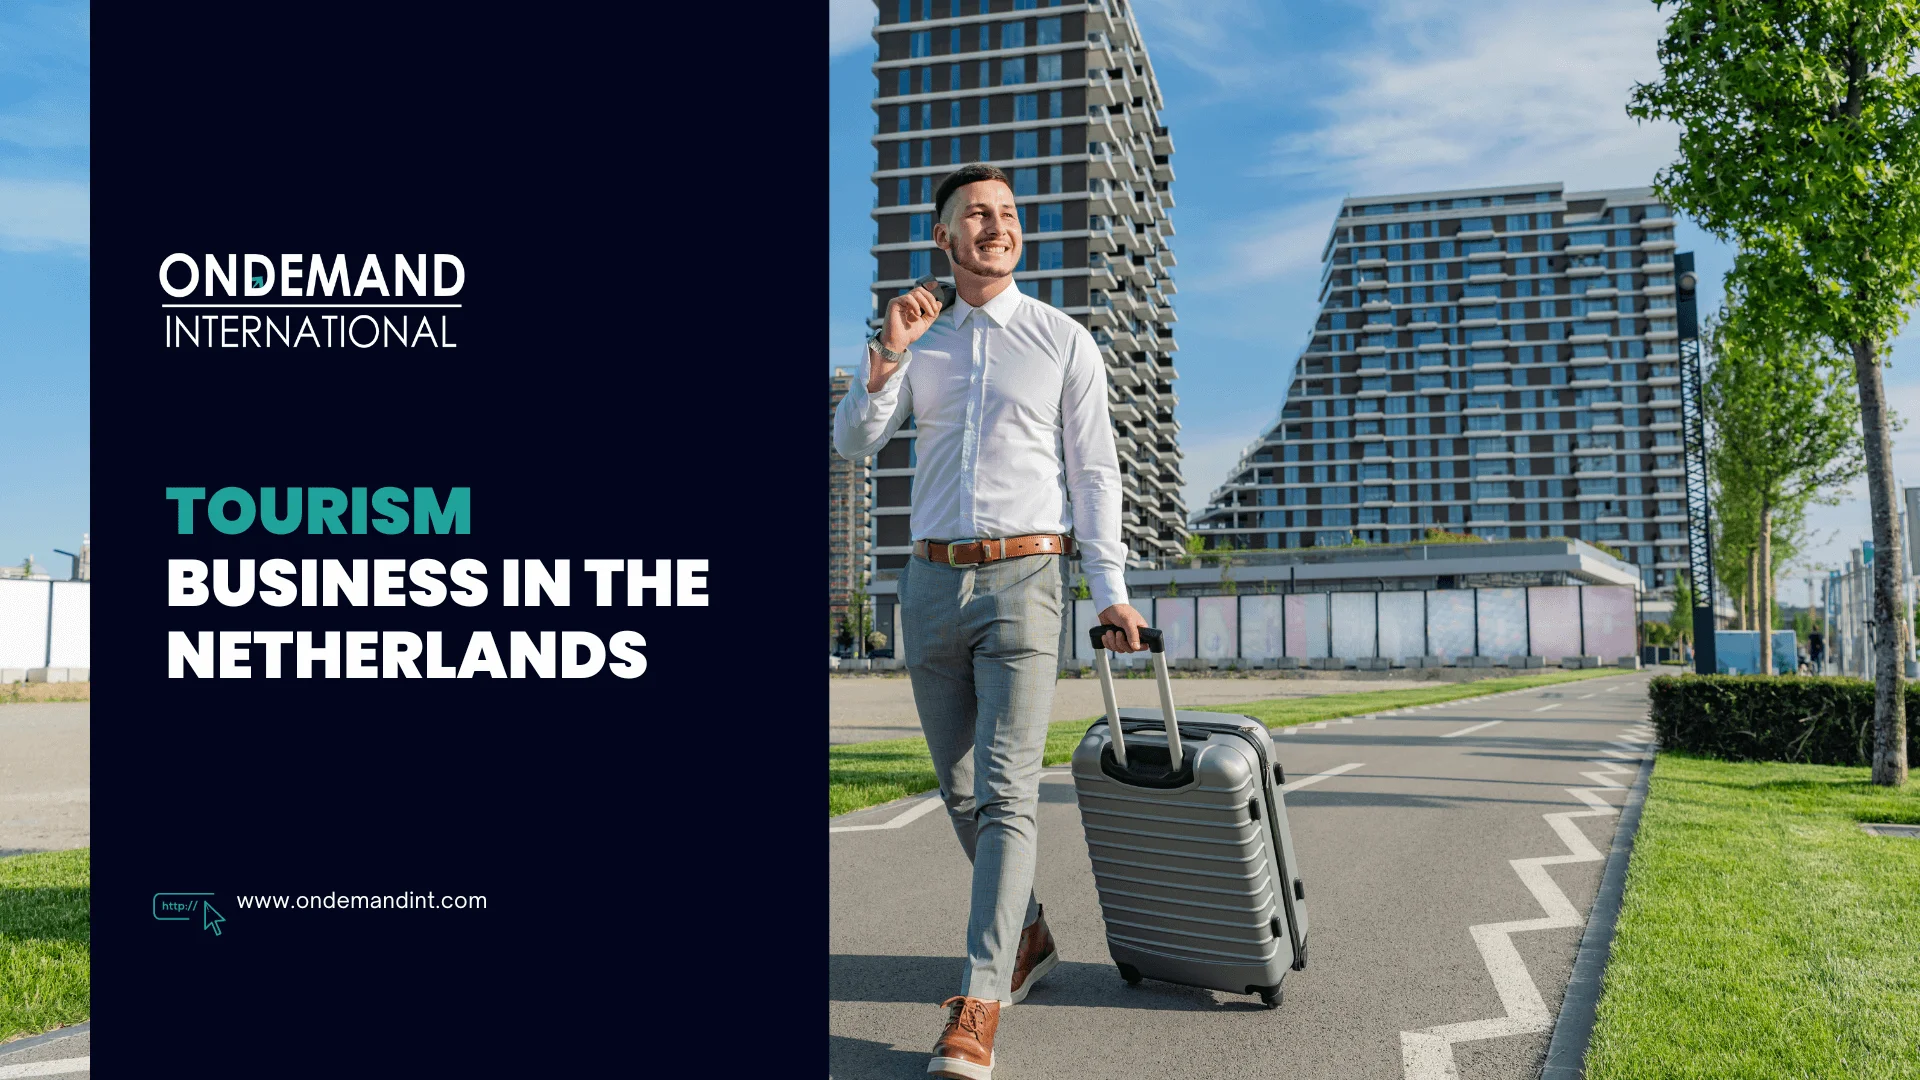 Tourism Business in the Netherlands: Requirements & Benefits Explained